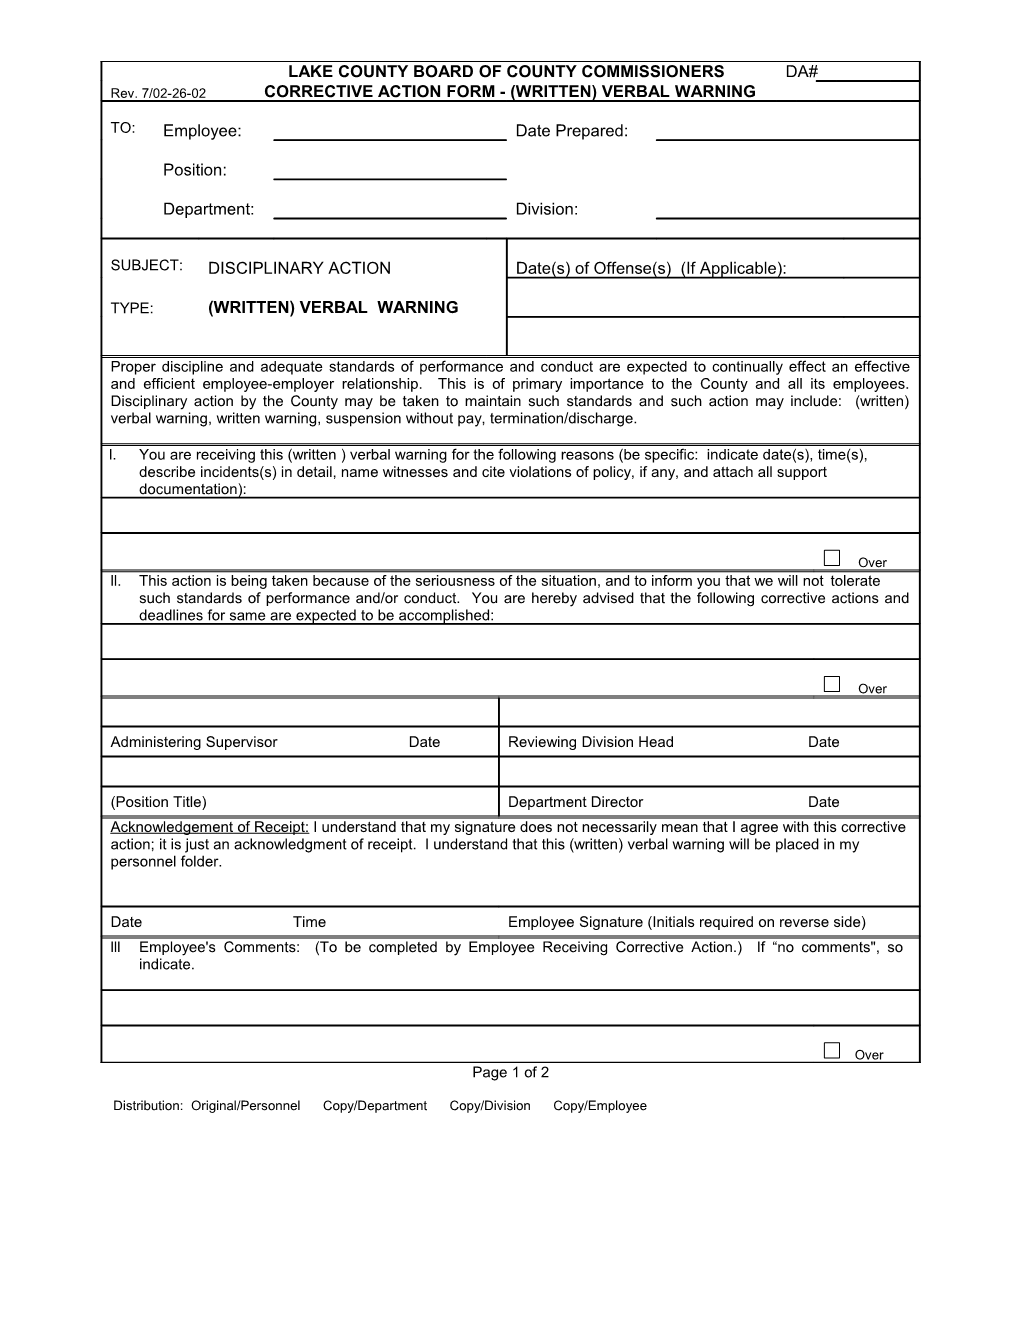 Corrective Action Form (Firefighters and Lieutenants Only) - Verbal Warning